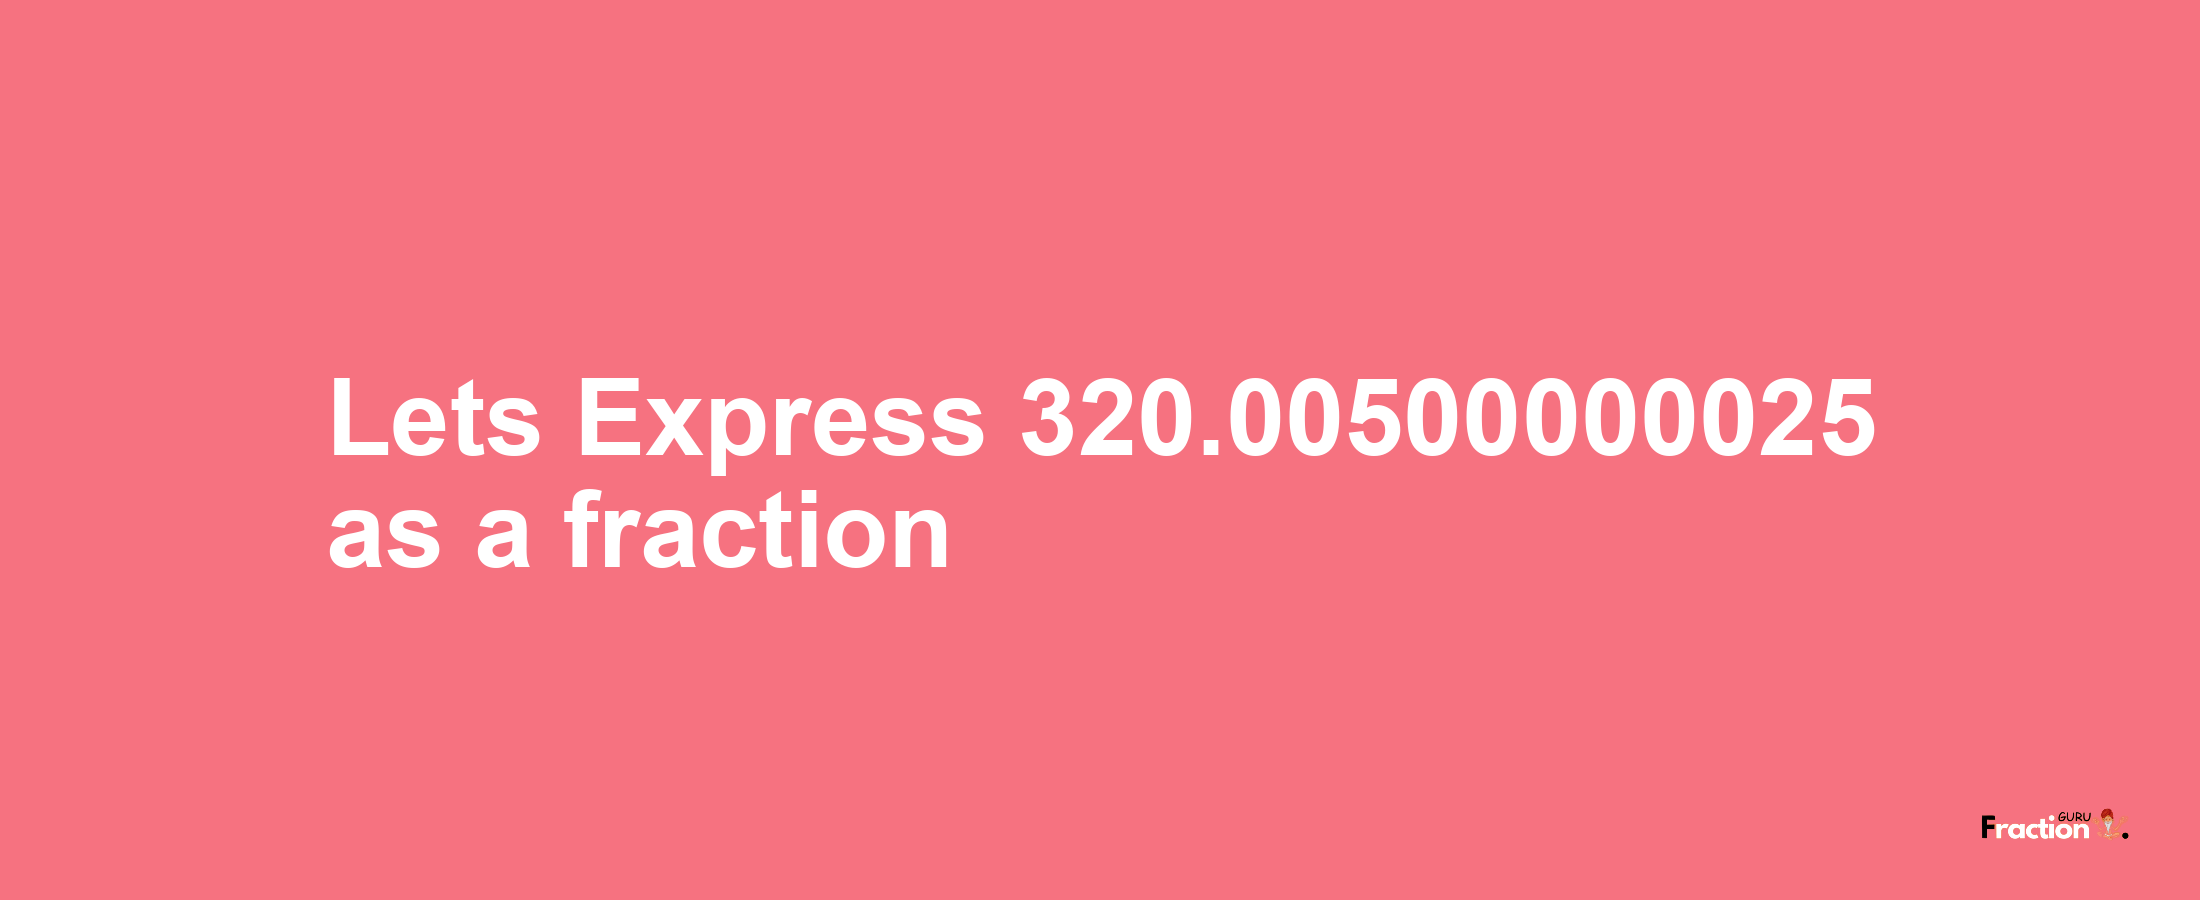 Lets Express 320.00500000025 as afraction